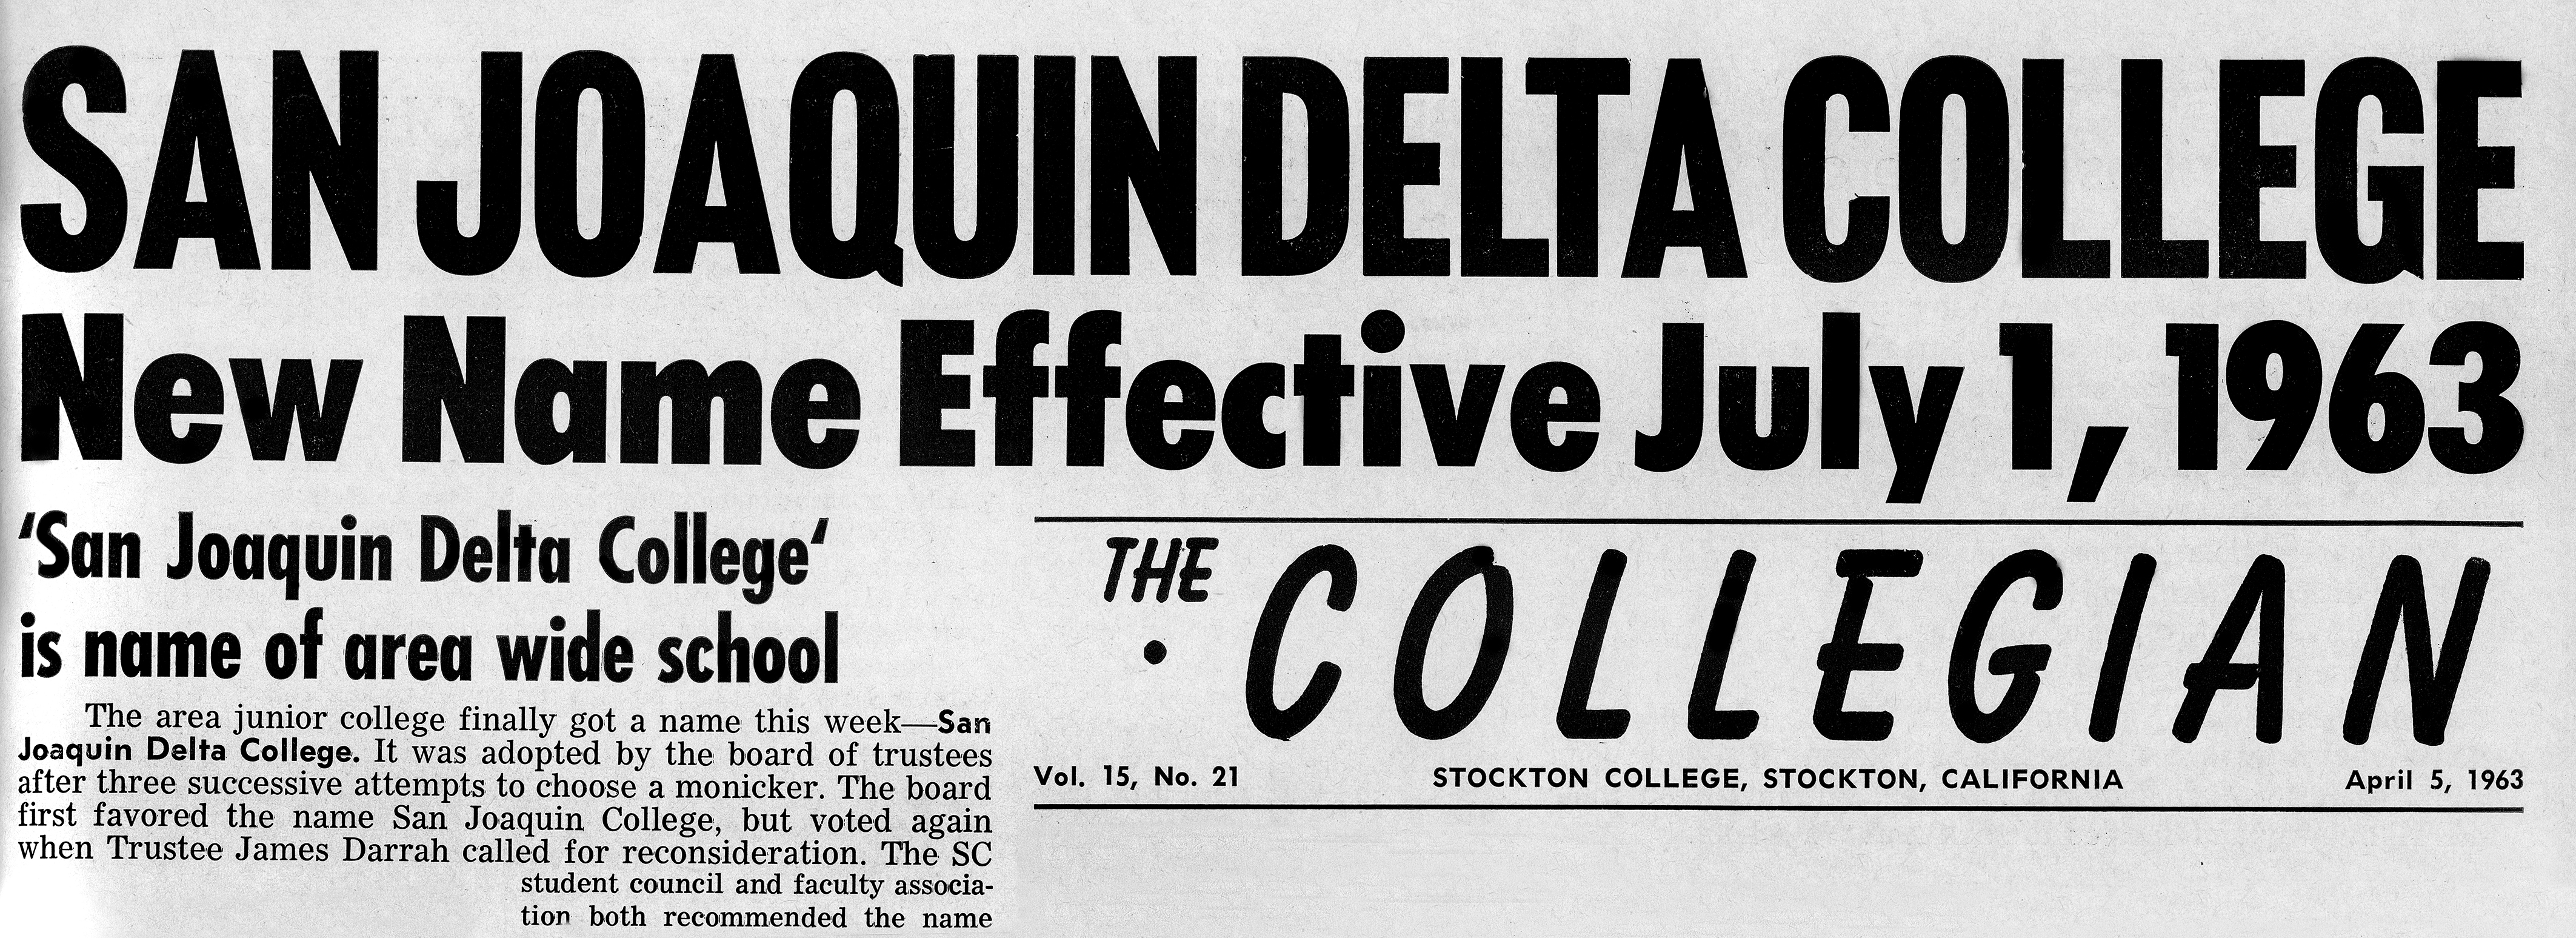 The Collegian's banner headline spreading the news about Delta College